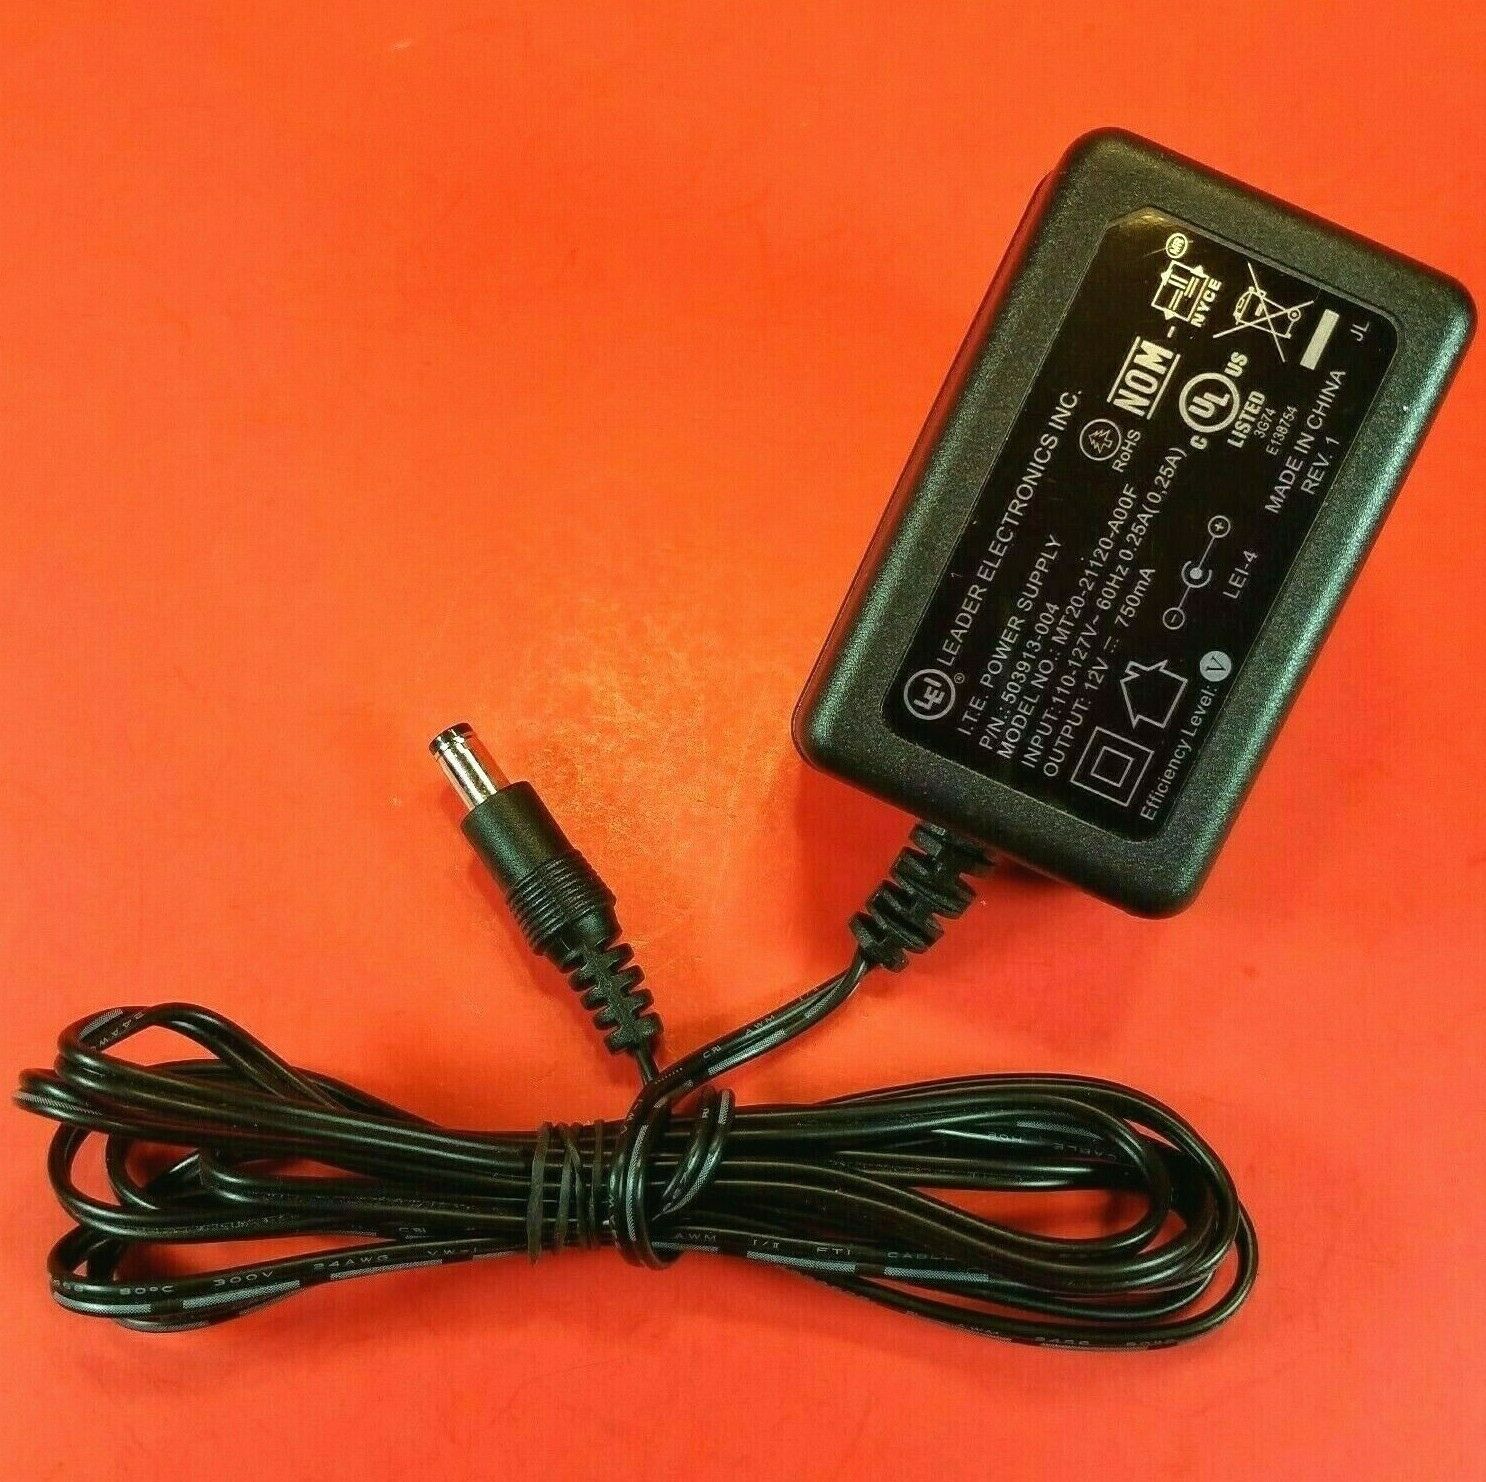 Genuine LEI I.T.E. Power Supply 12V - 750mA OEM AC Adapter Model MT20-21120-A00F Type: Adapter Output Voltage: 12 V F